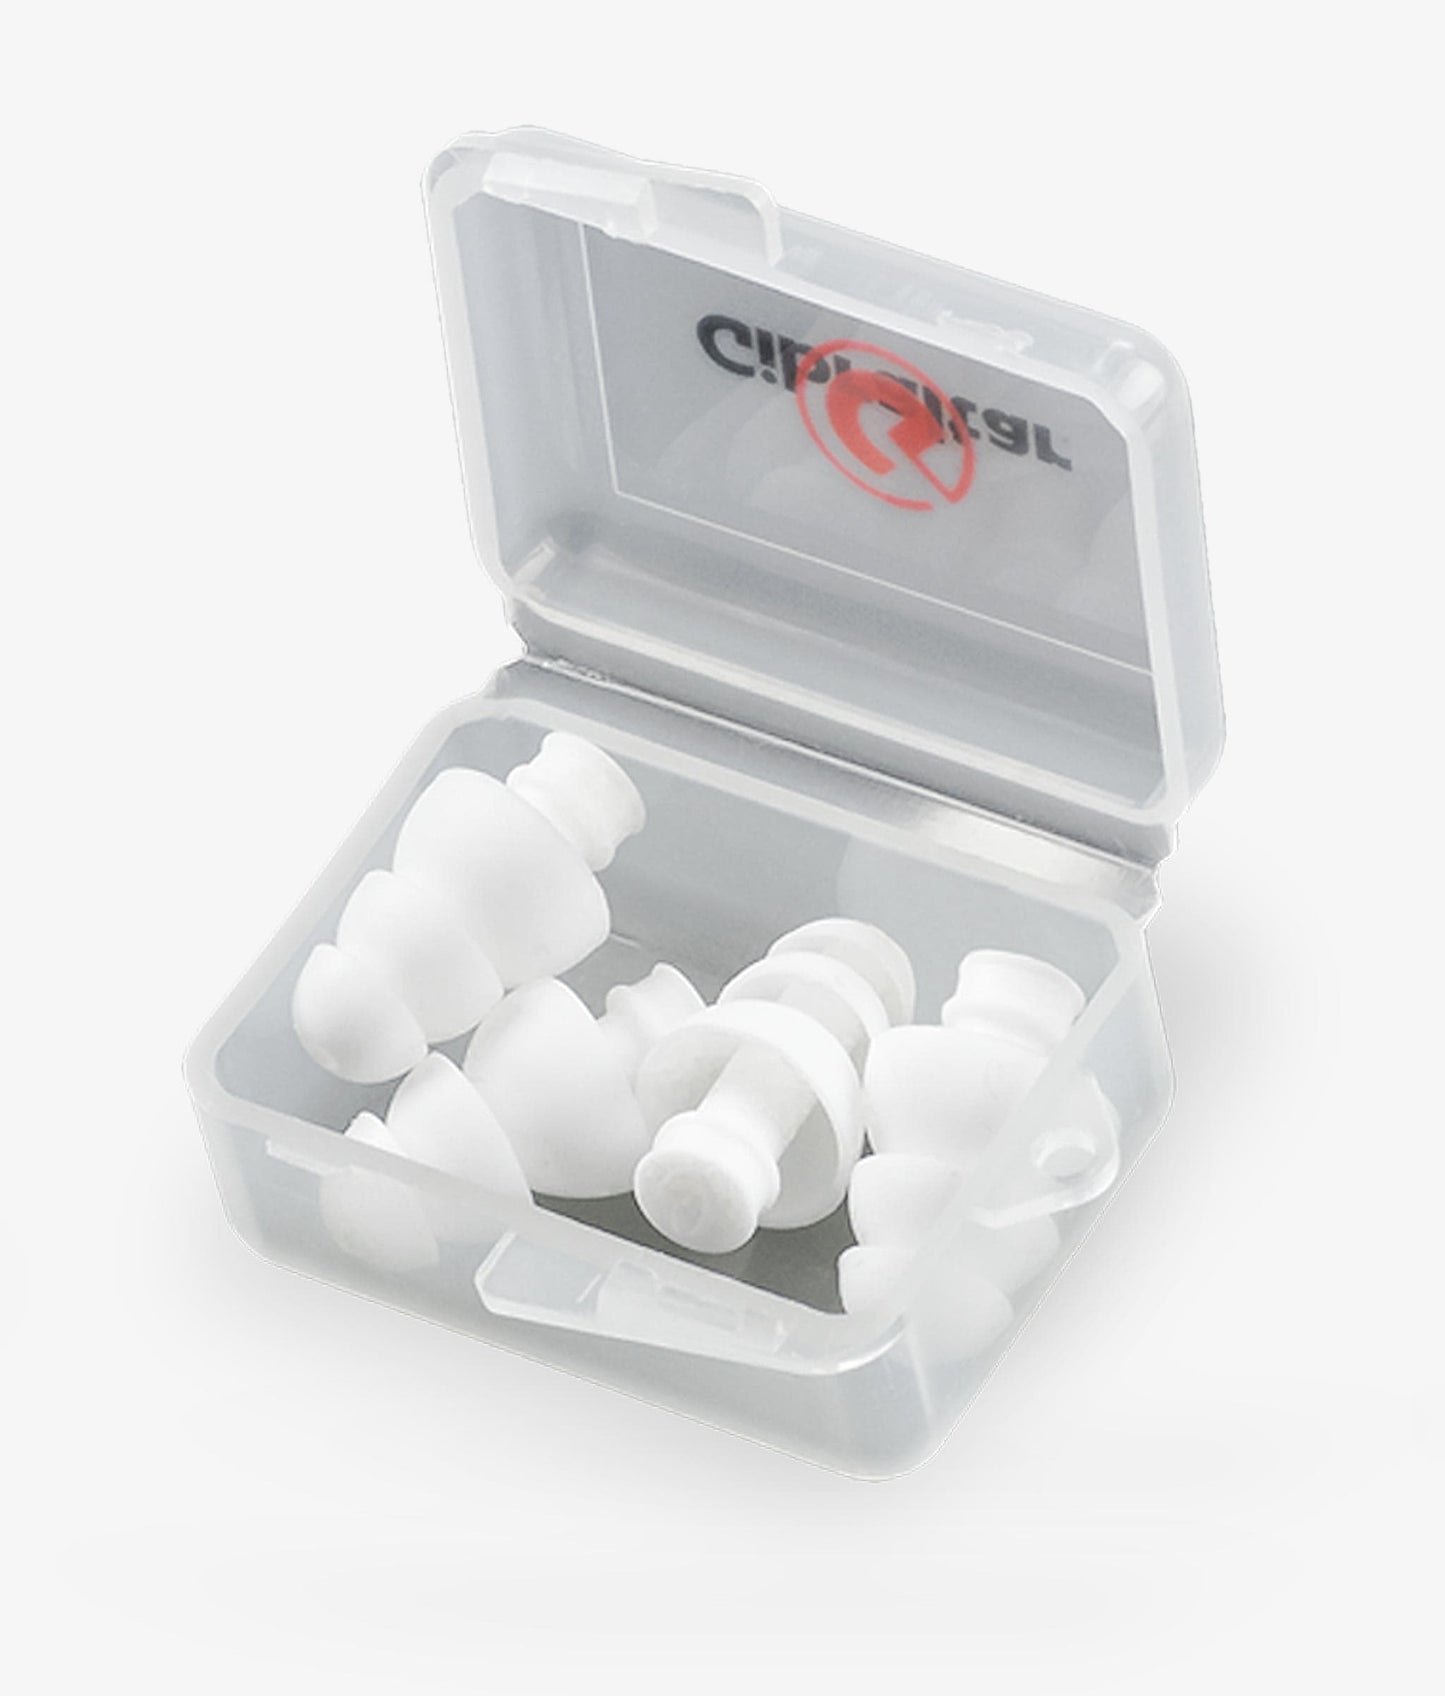  Gibraltar SC-GEP Ear Plugs, 2 Pairs with Case drummer accessory